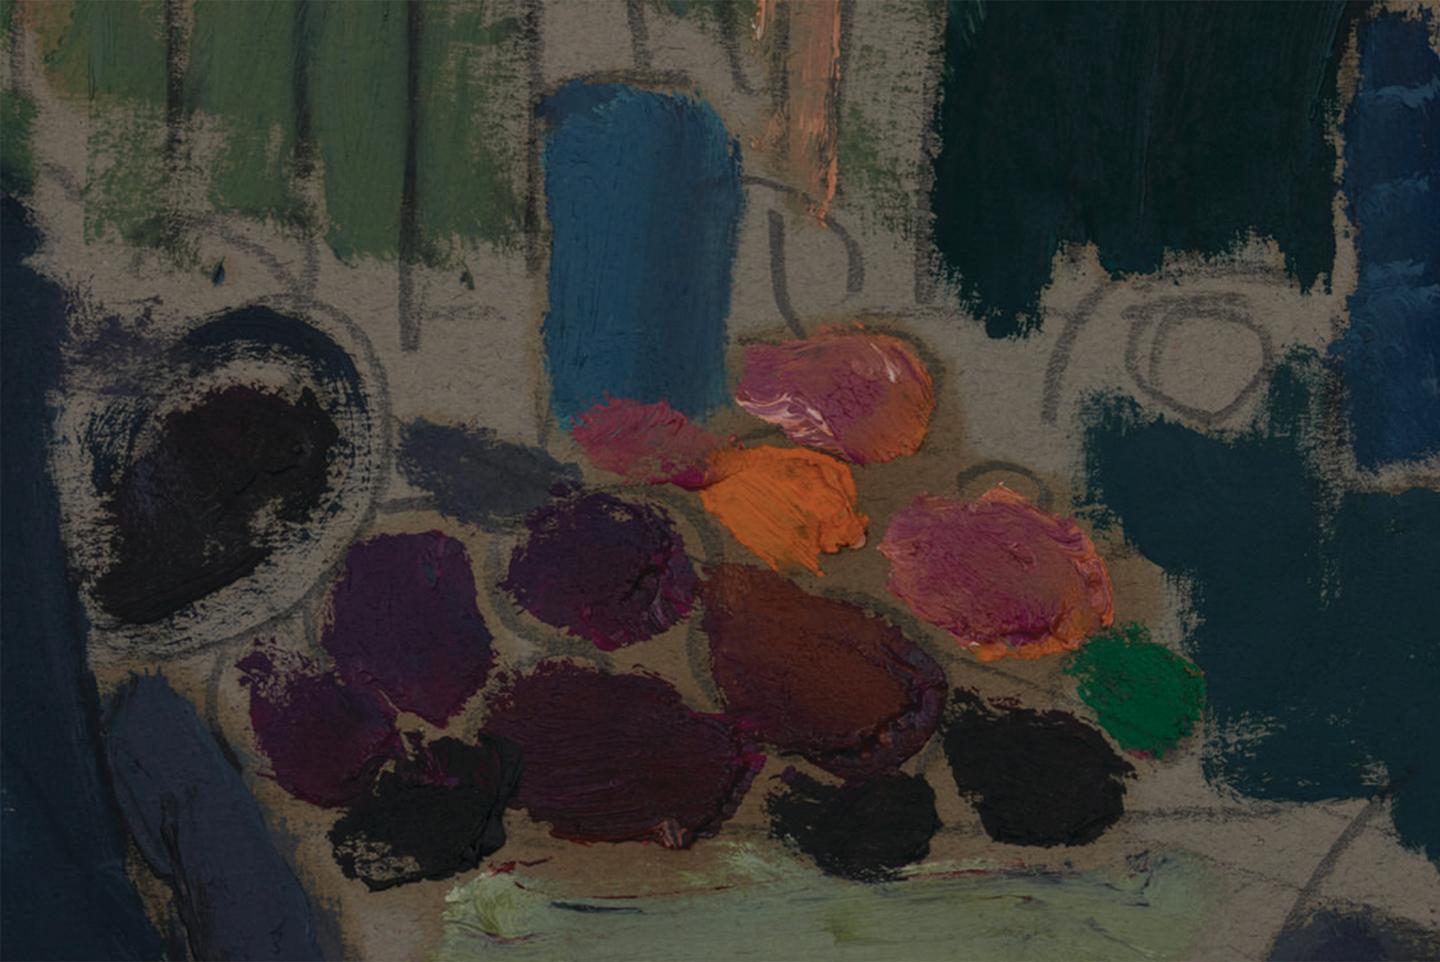 20th century abstract still life by Cleveland School artist  - Painting by Joseph O'Sickey